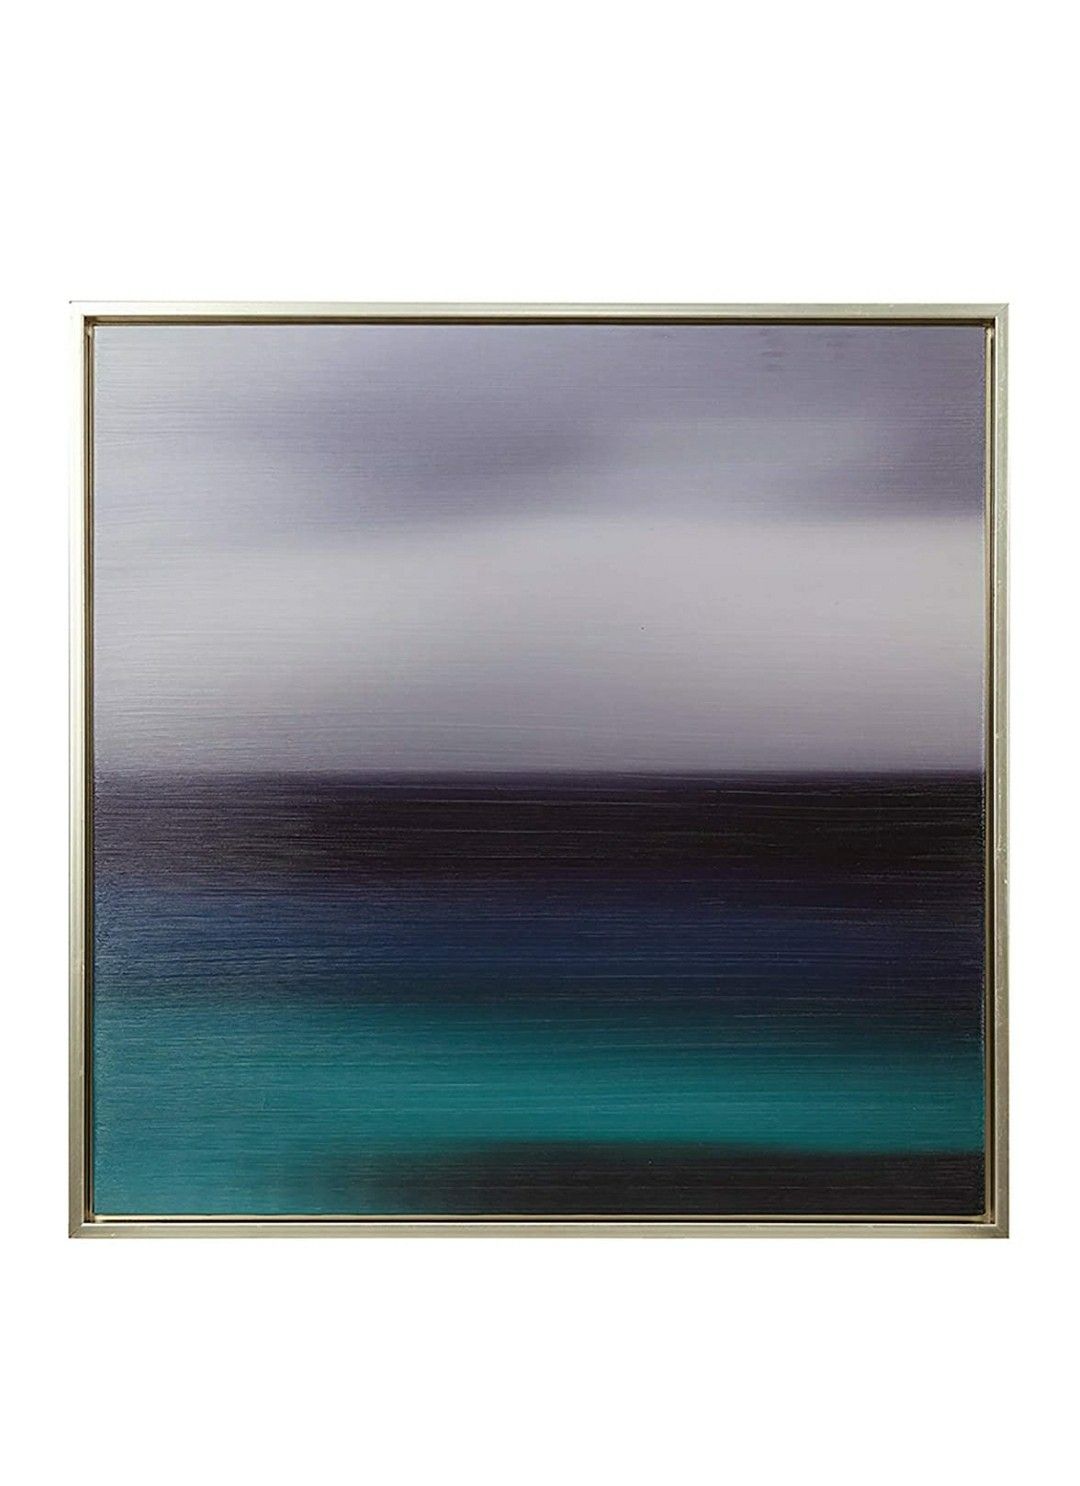 MADISON PARK SIGNATURE Blue Seascape Heavy Brush Gel Coat with Silver Framed Blue See Below